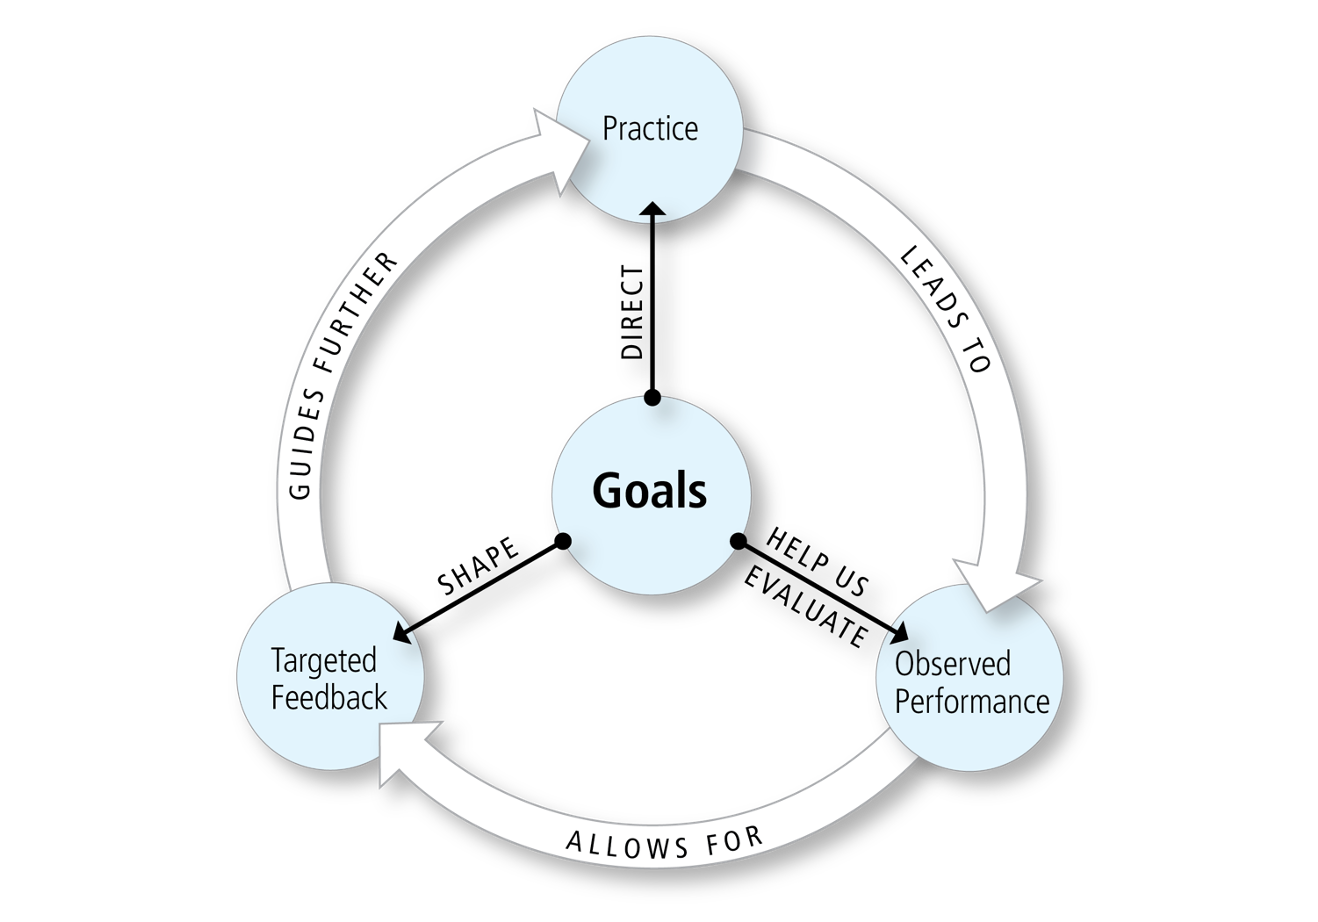 Cycle of goal-directed practice and feedback. Reference description above.